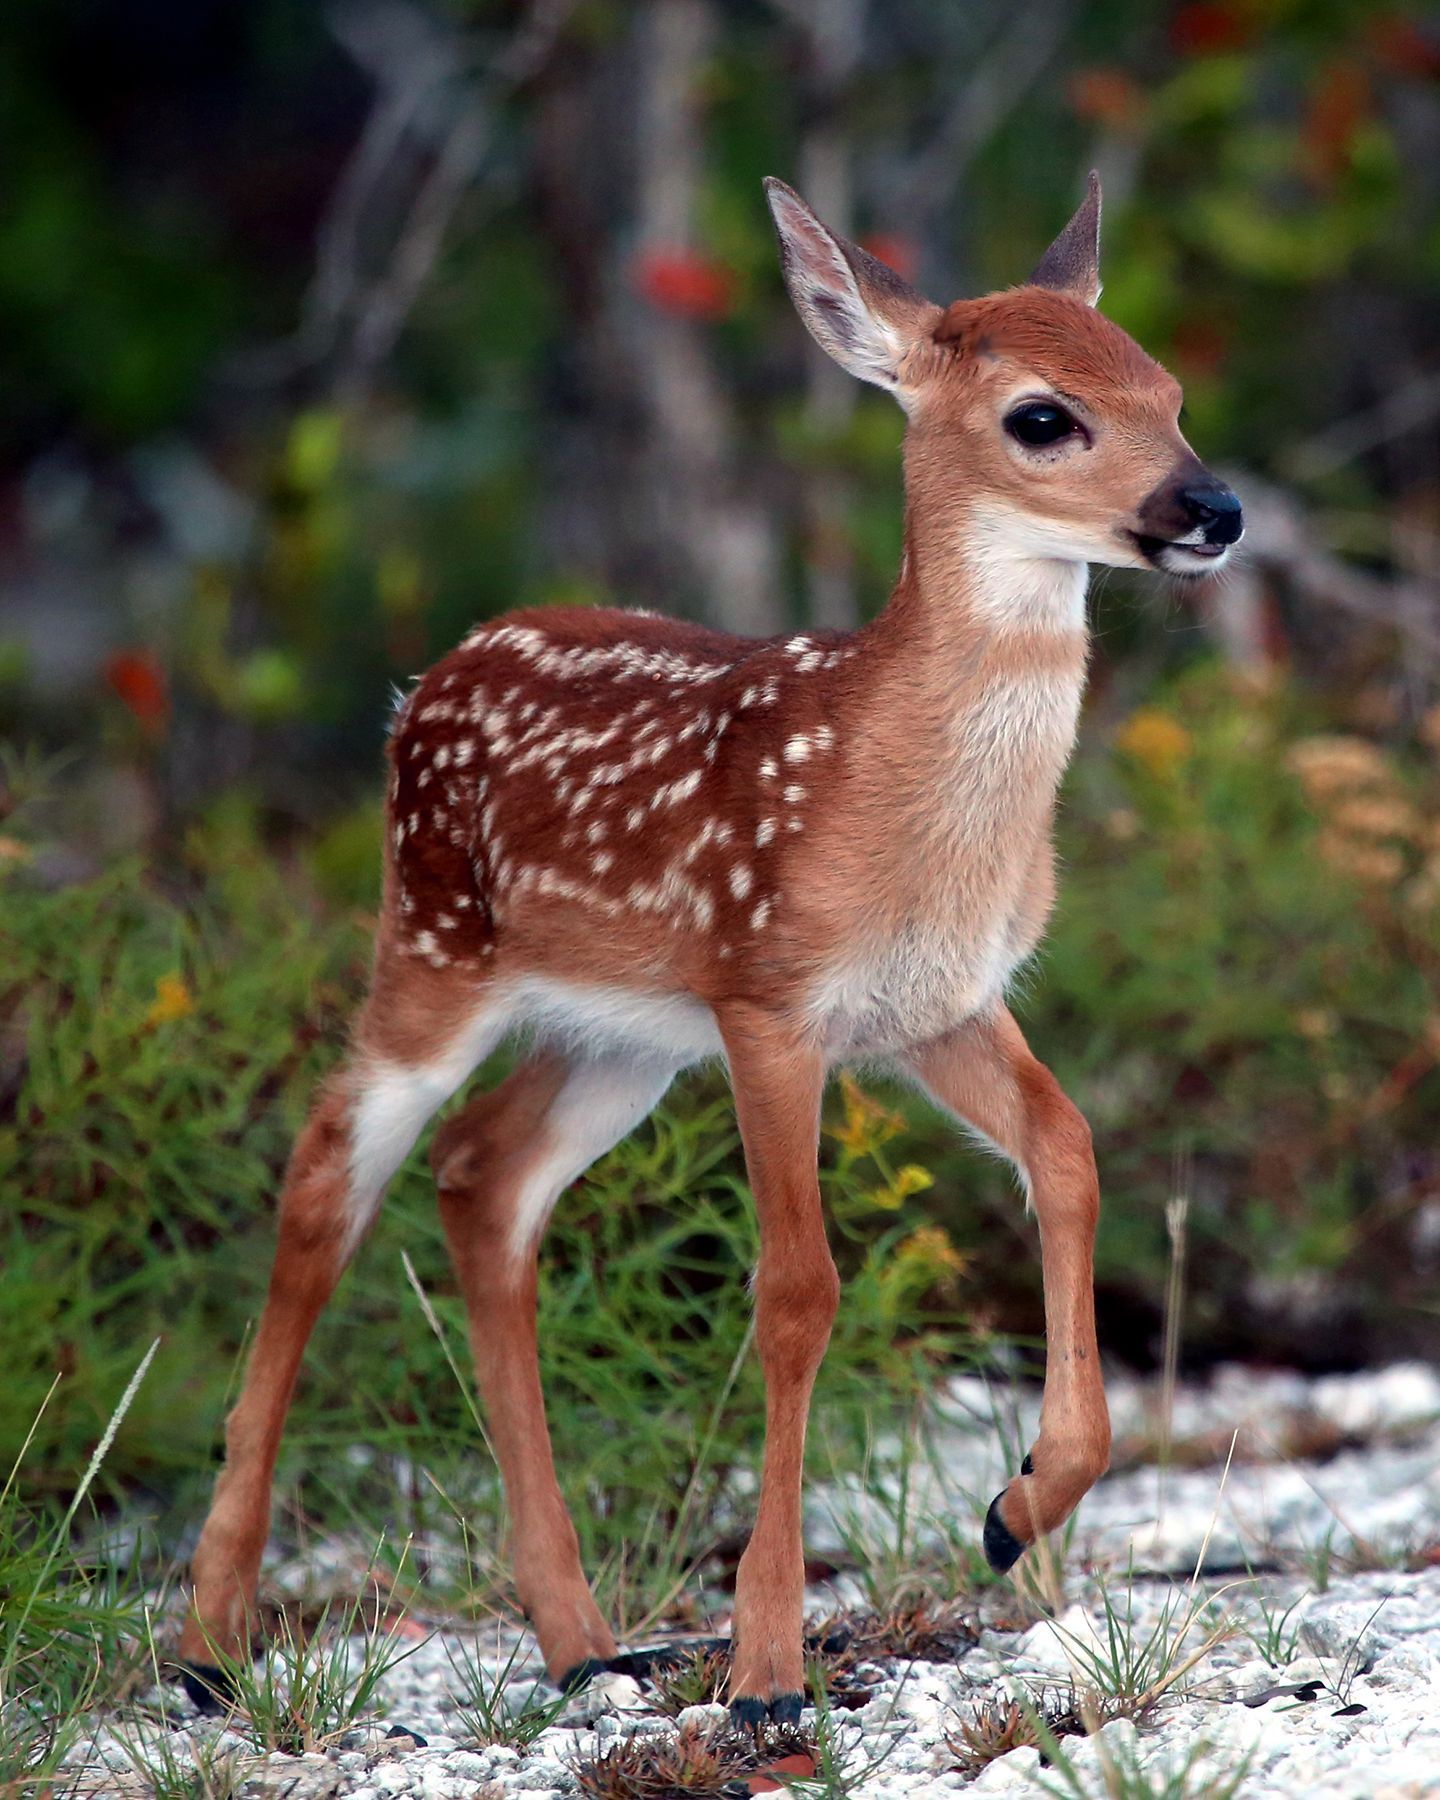 Key West The Newspaper Manager: Key Deer Screwworm Threat Appears Over But We Must Remain Vigilant - Baby animals picture, Cute animals, Baby animals